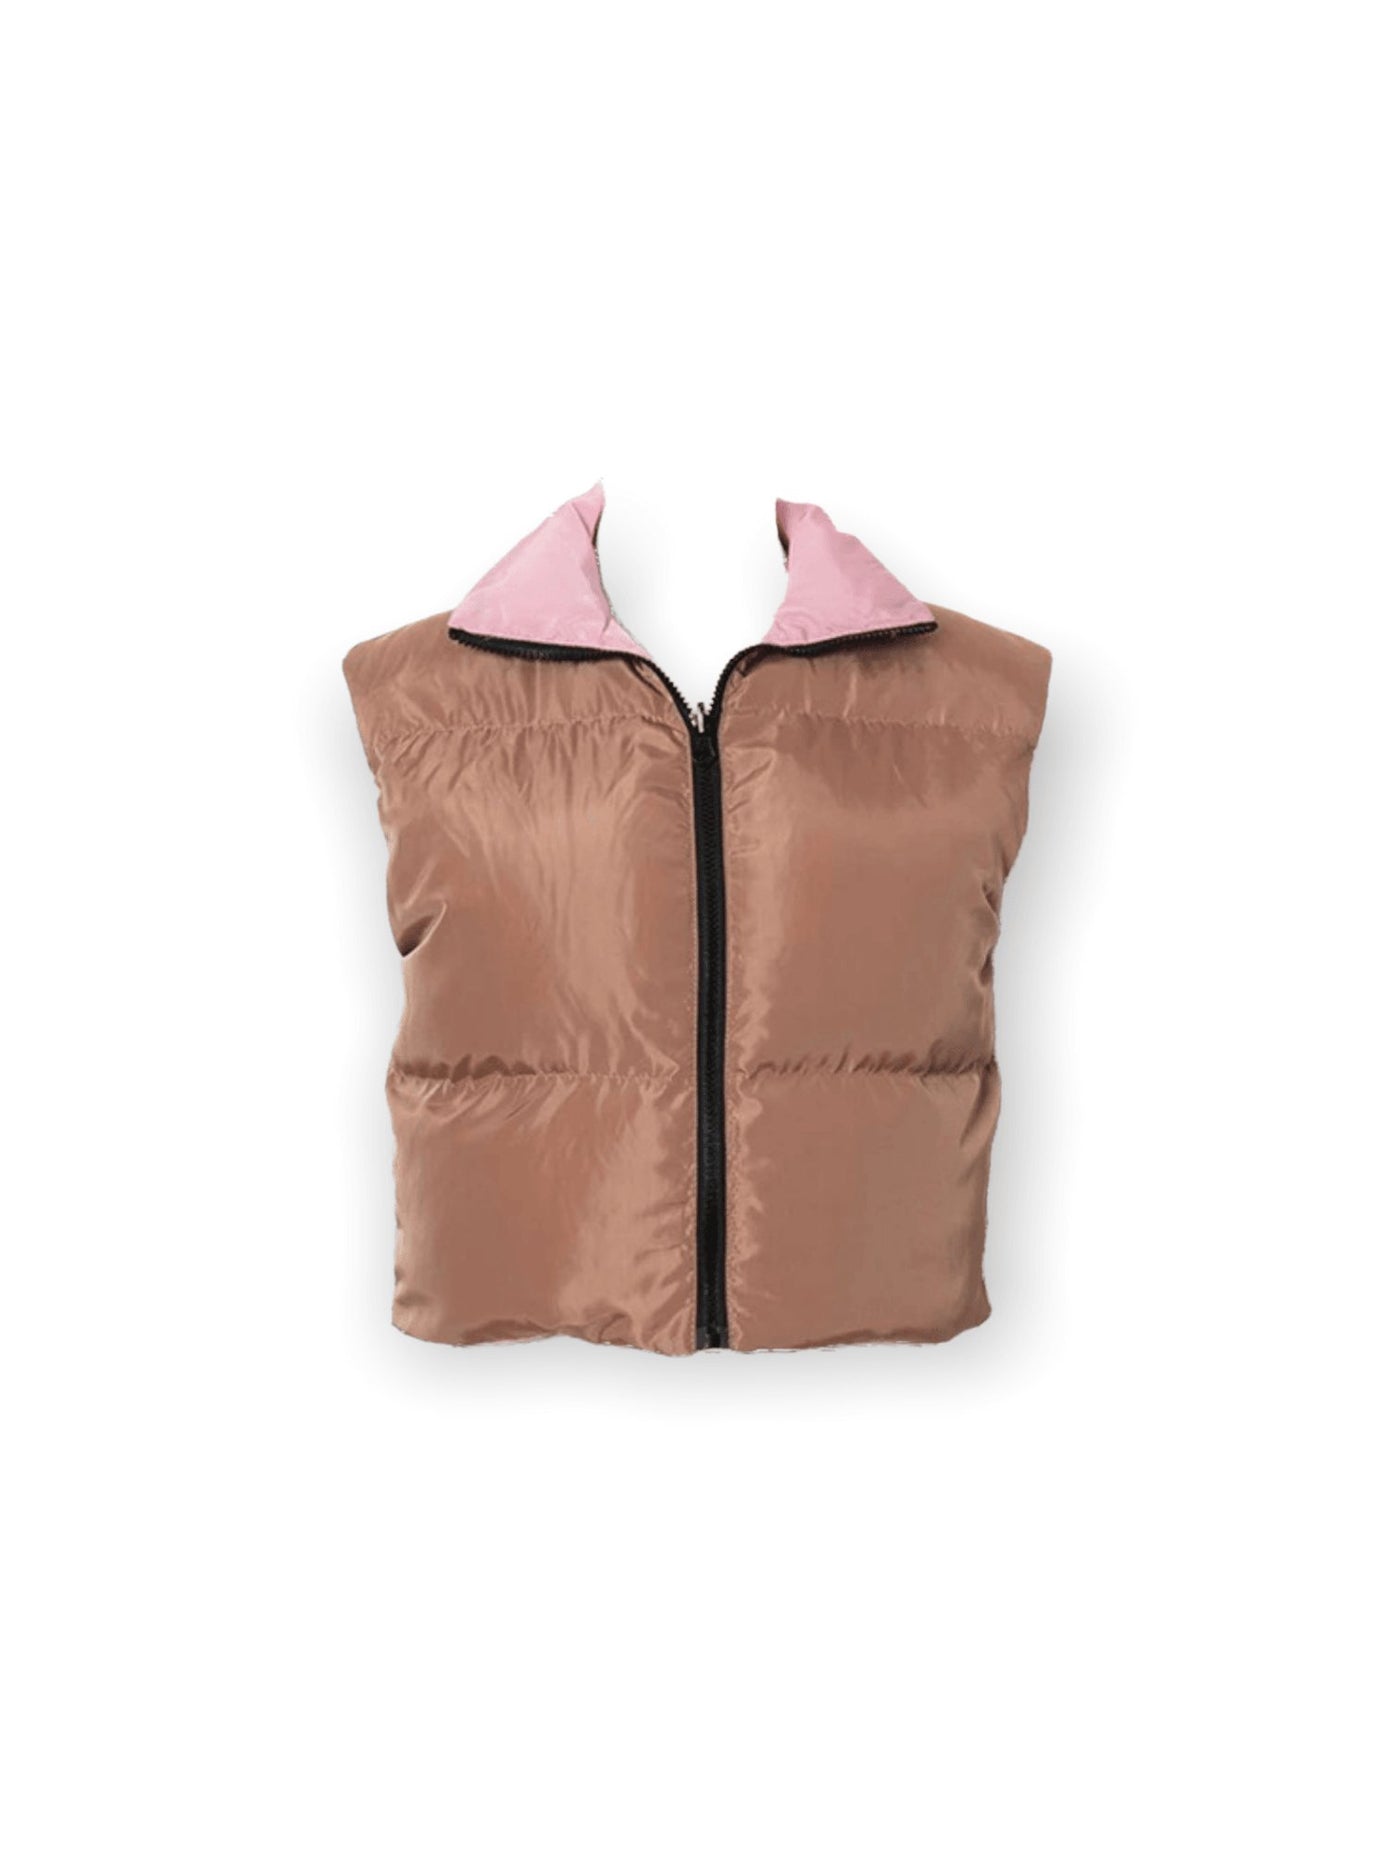 This Is My Good Side Reversible Vest - Dezired Beauty Boutique